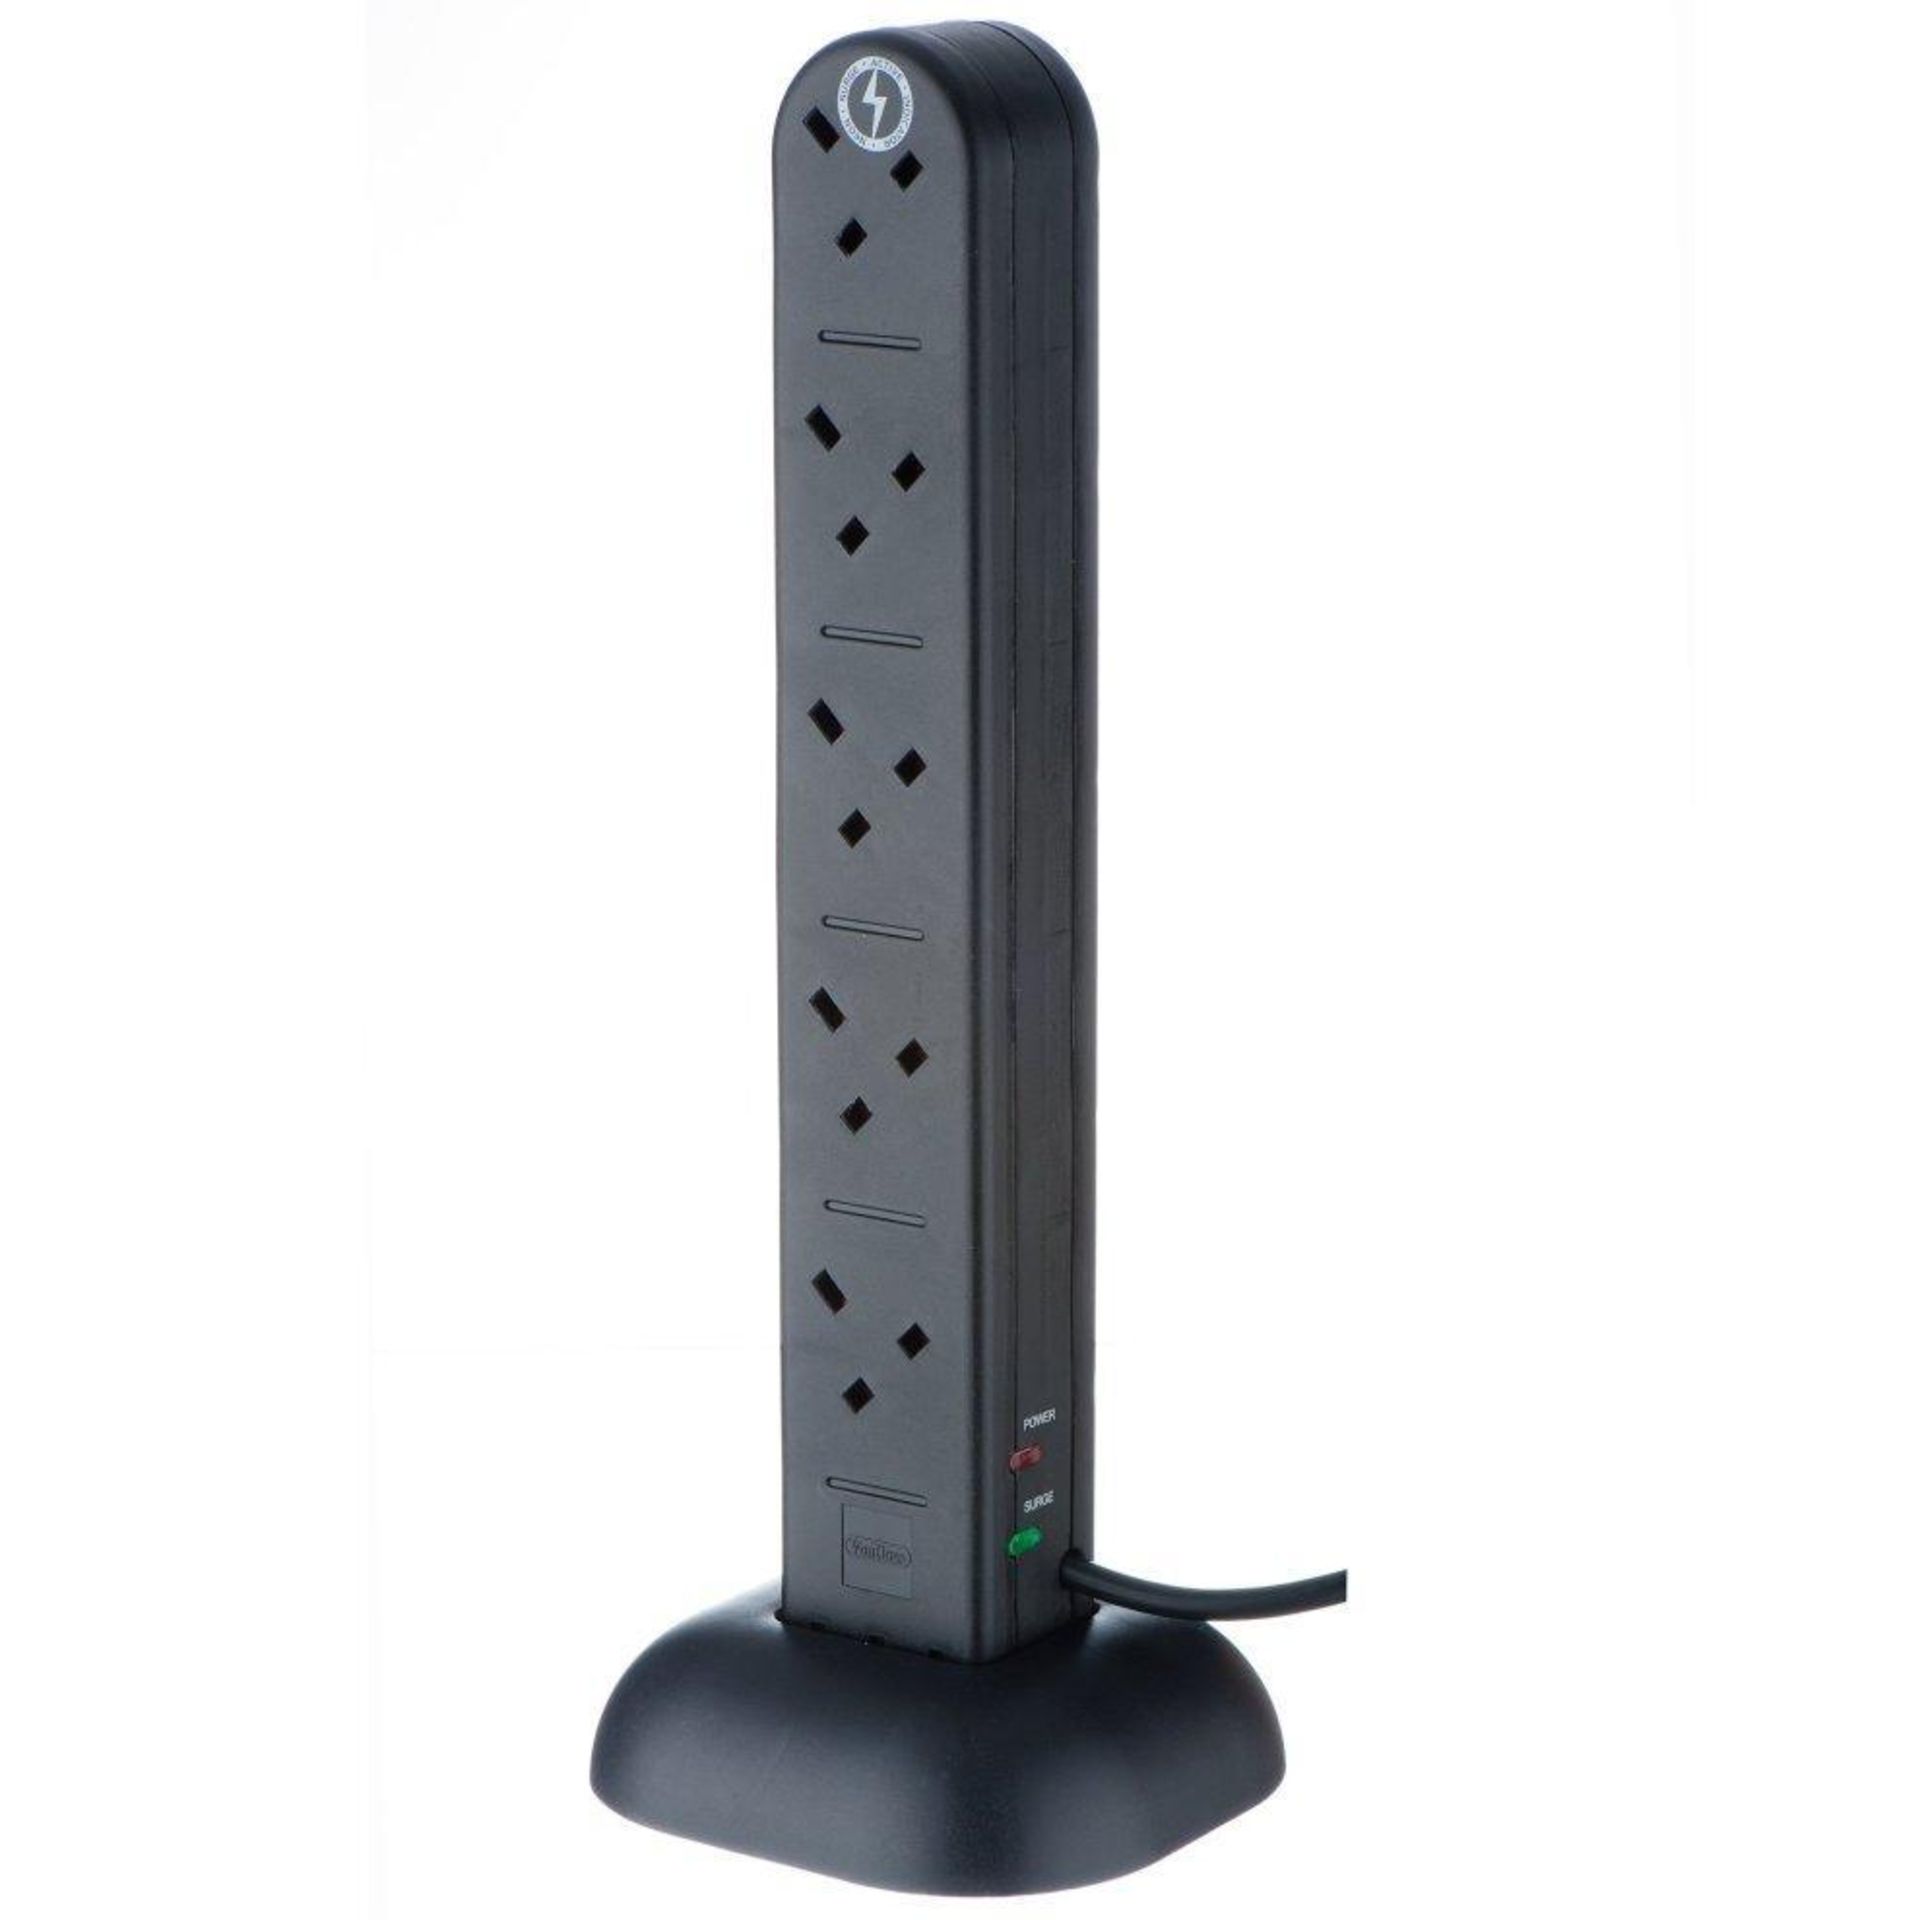 10 Socket Tower - Black 10 Gang Socket TowerThe Luxury Tower Socket is a sensible choice for home